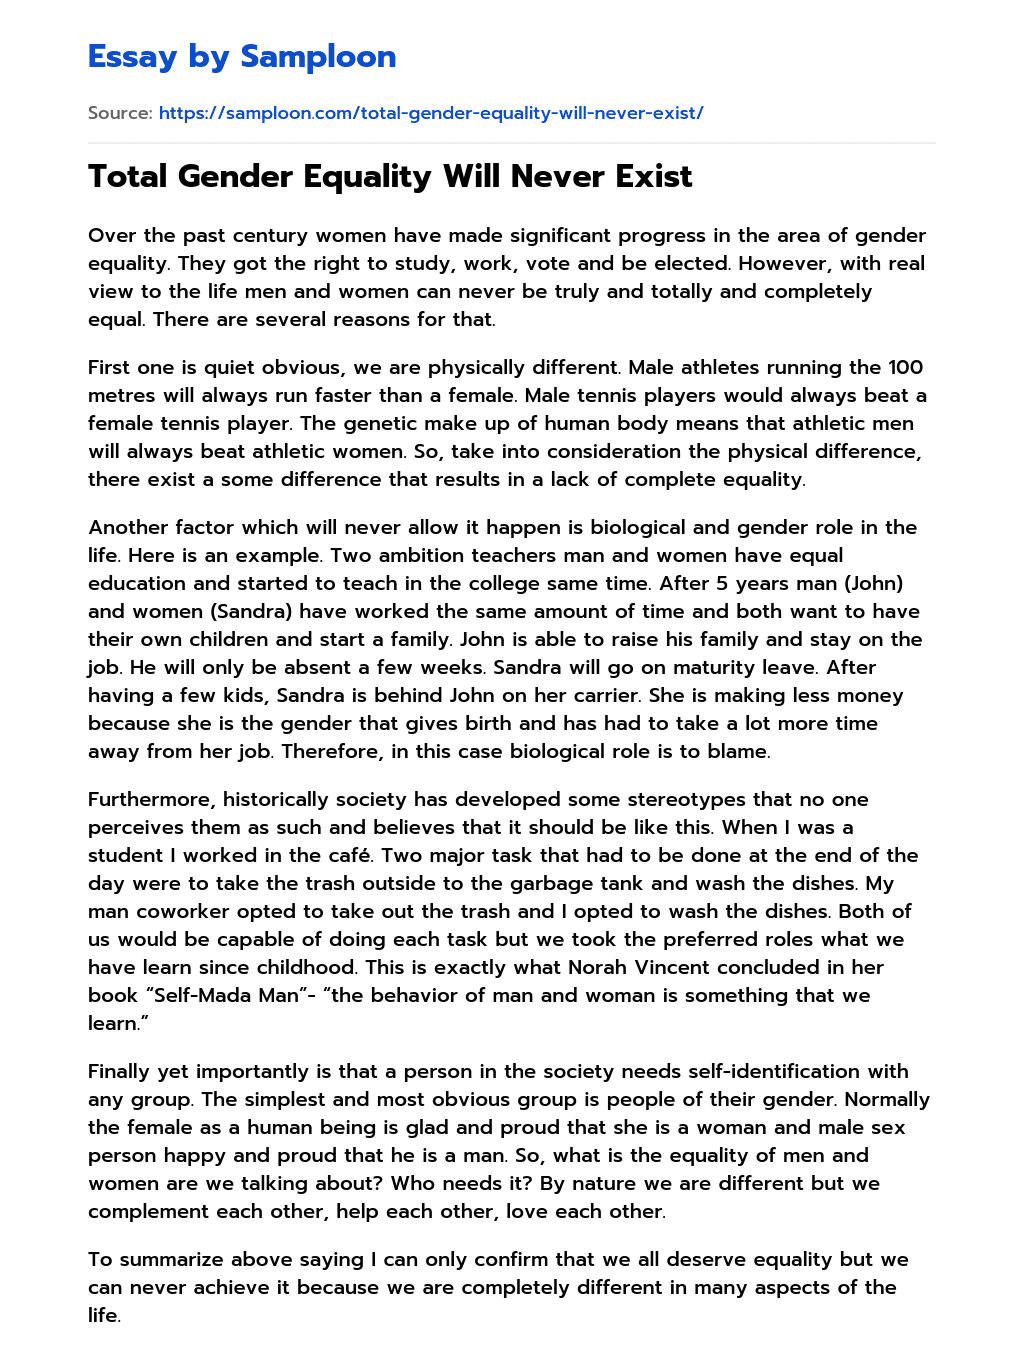 Total Gender Equality Will Never Exist essay